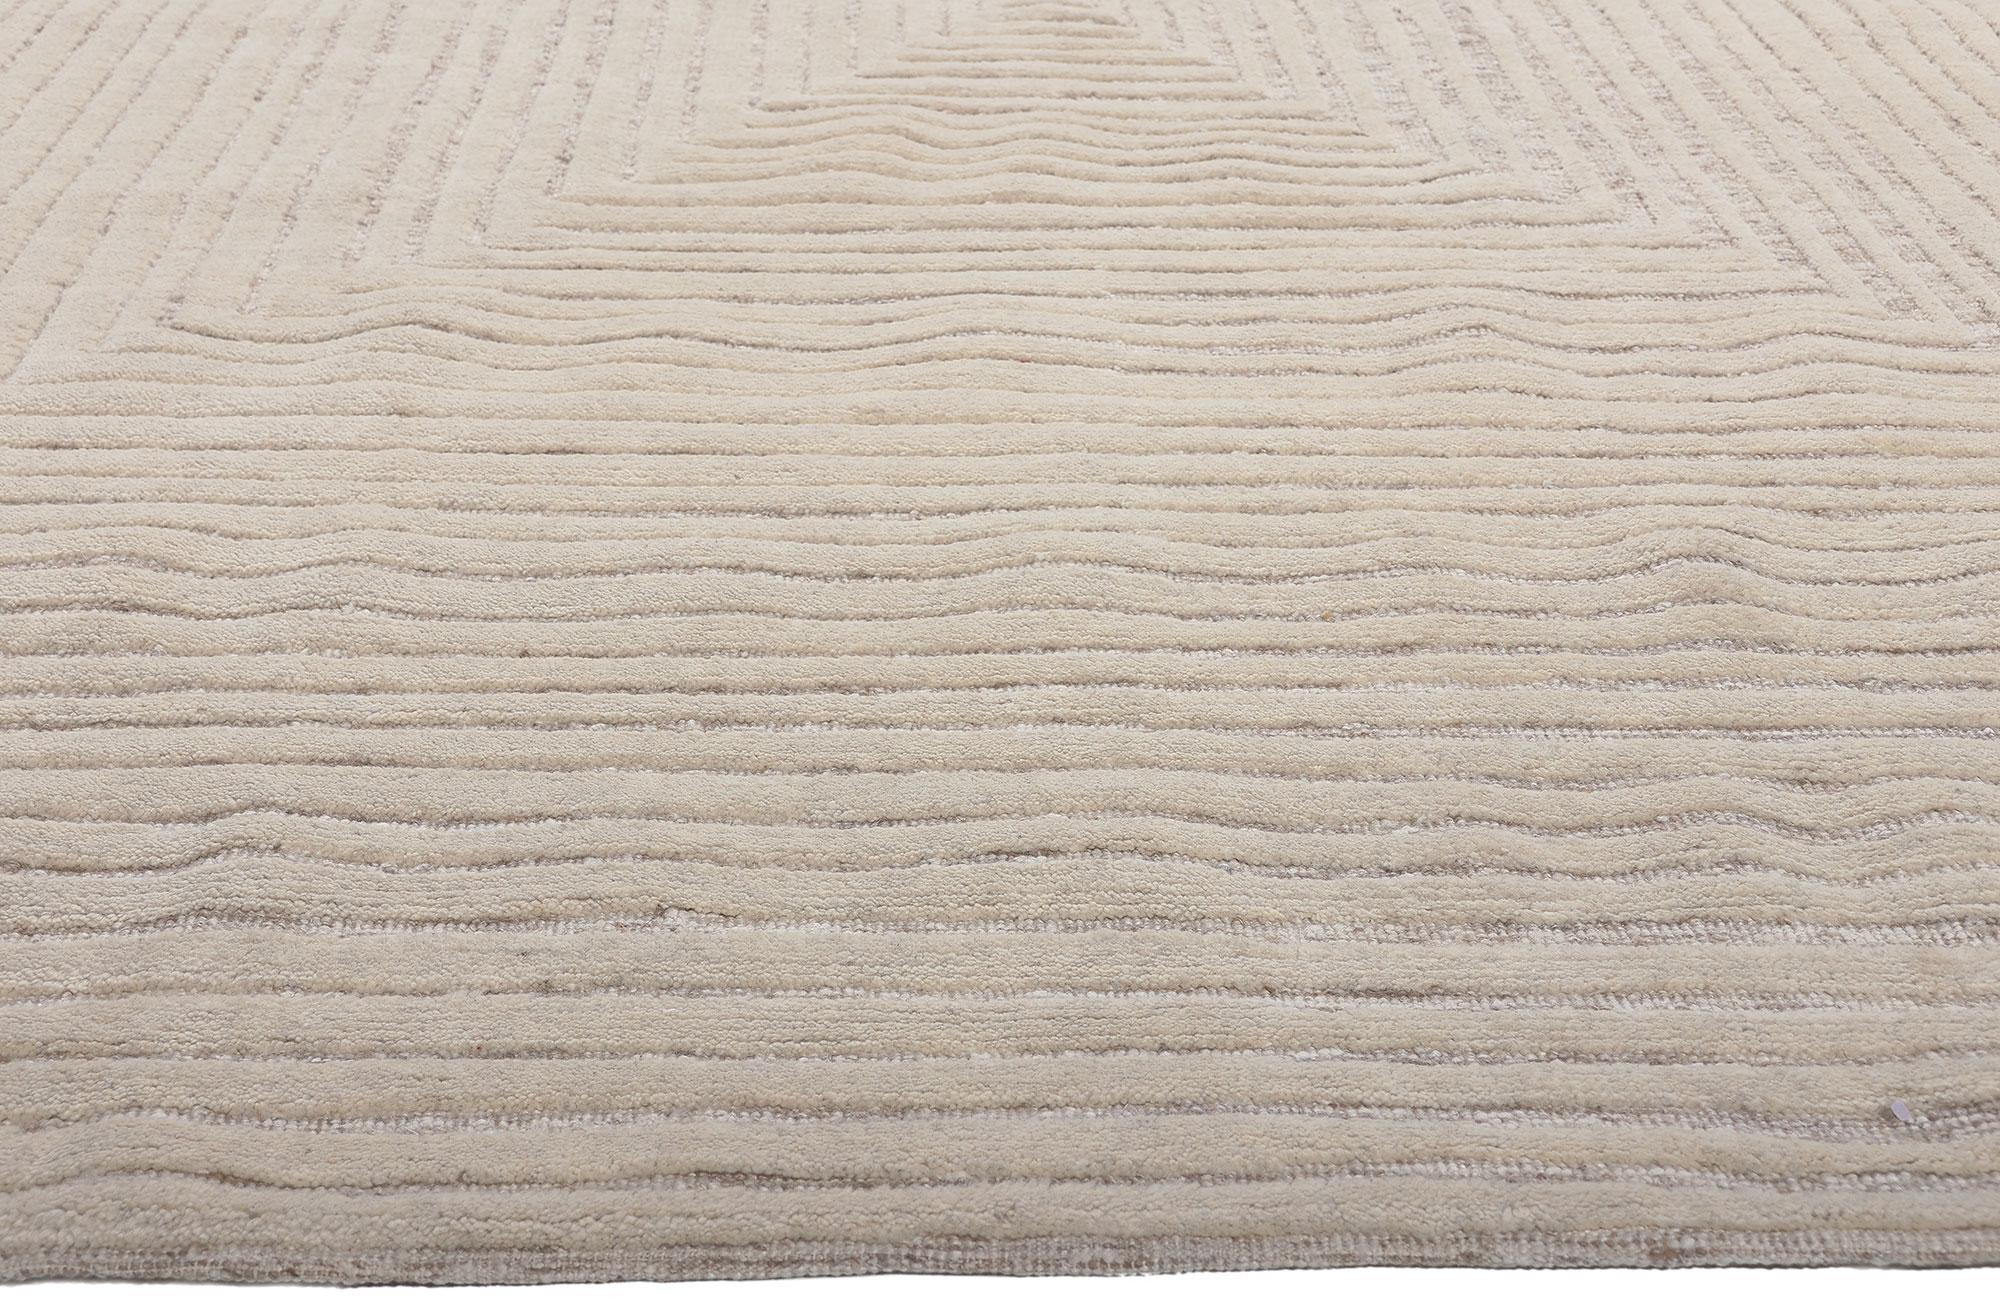 Indian Modern Textured High-Low Rug, Sublime Simplicity Meets Tantalizing Texture